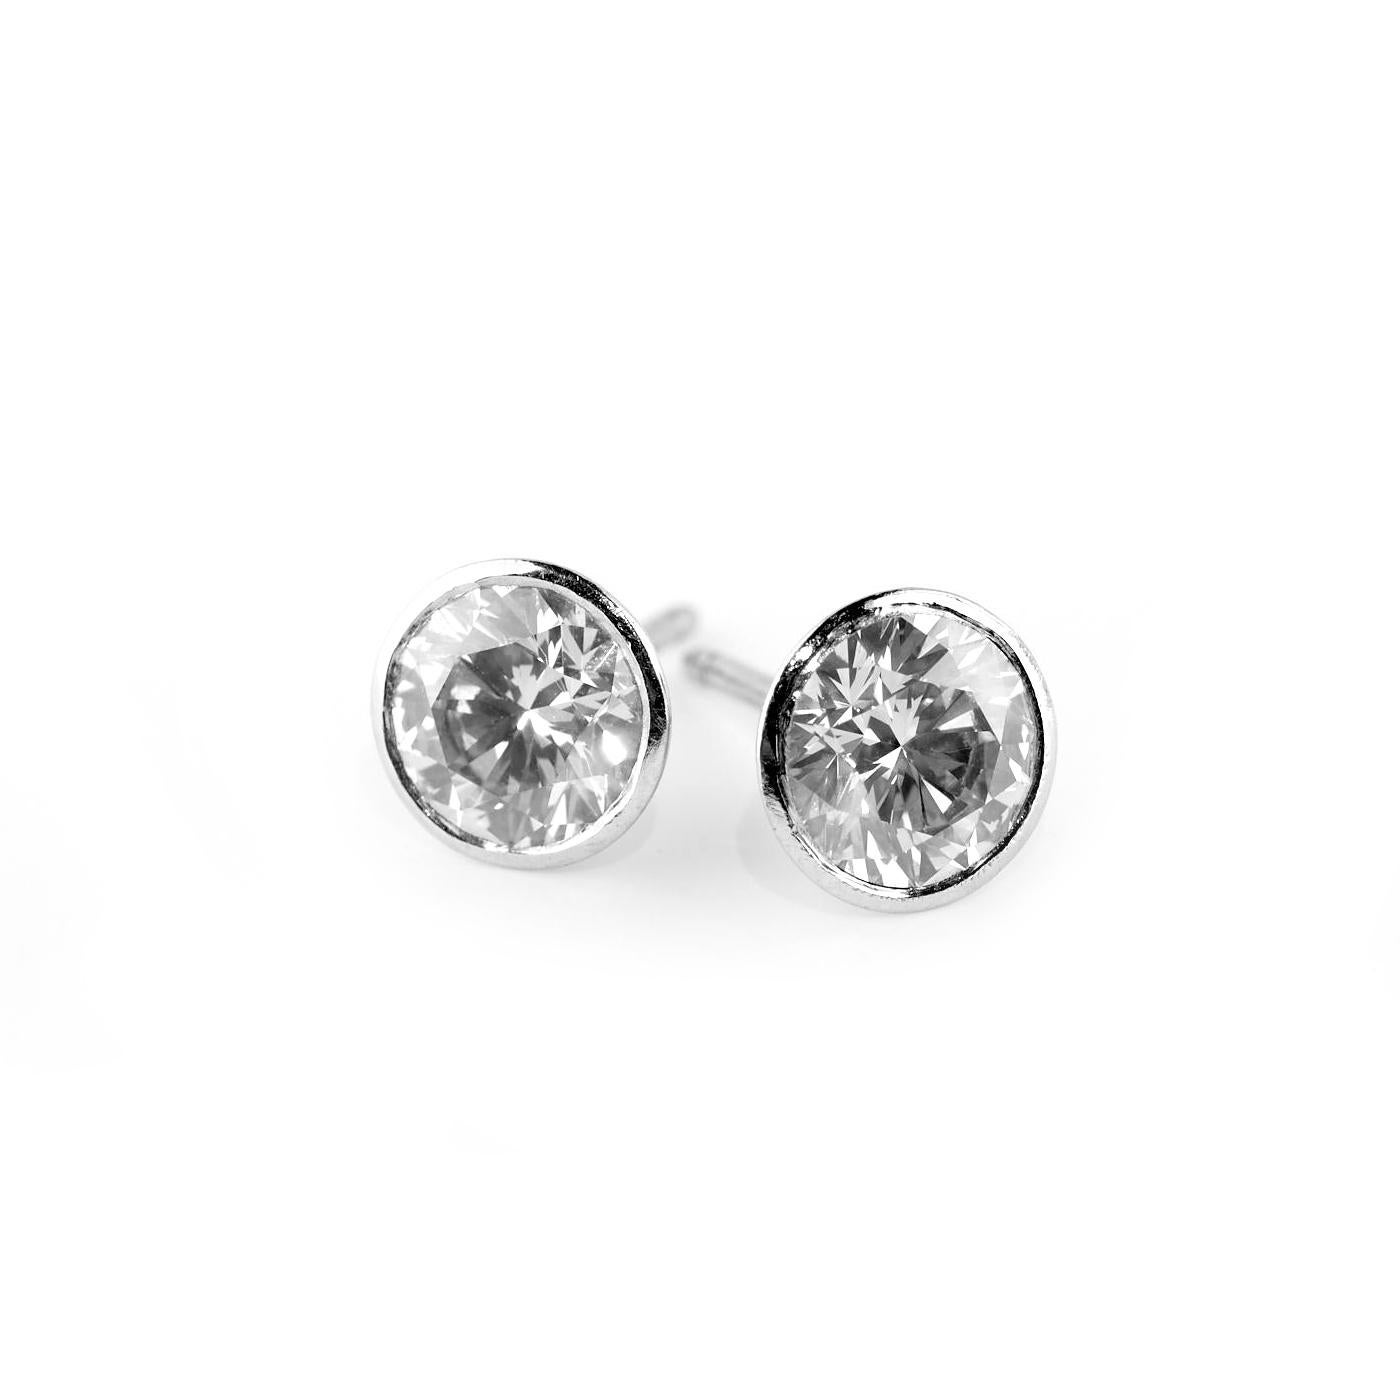 Bring traditional style and sparkle to your look with this lovely pair of stud earrings. Each stud features a round-cut, 1.24 / 1.26-carat white diamond in a simple Platinum prong setting. The lovely earrings fasten with screw-back clasps for secure